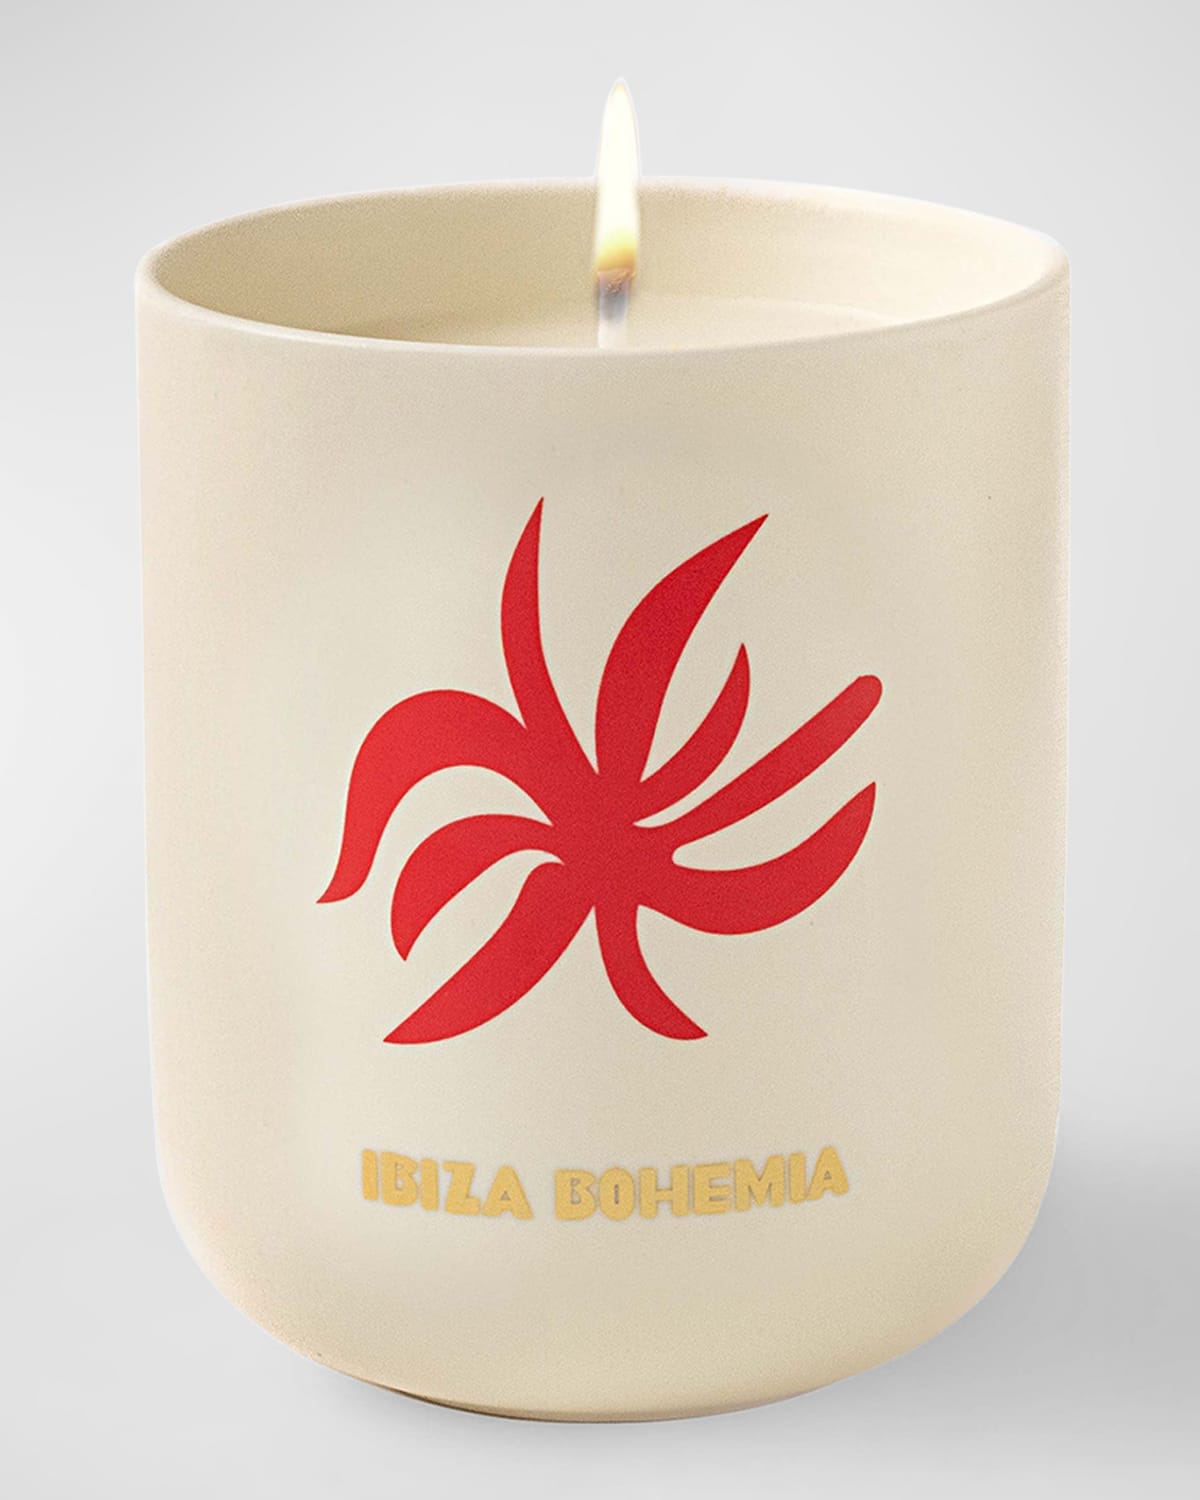 Assouline Publishing Travel From Home Scented Candle In Ibiza Bohemia